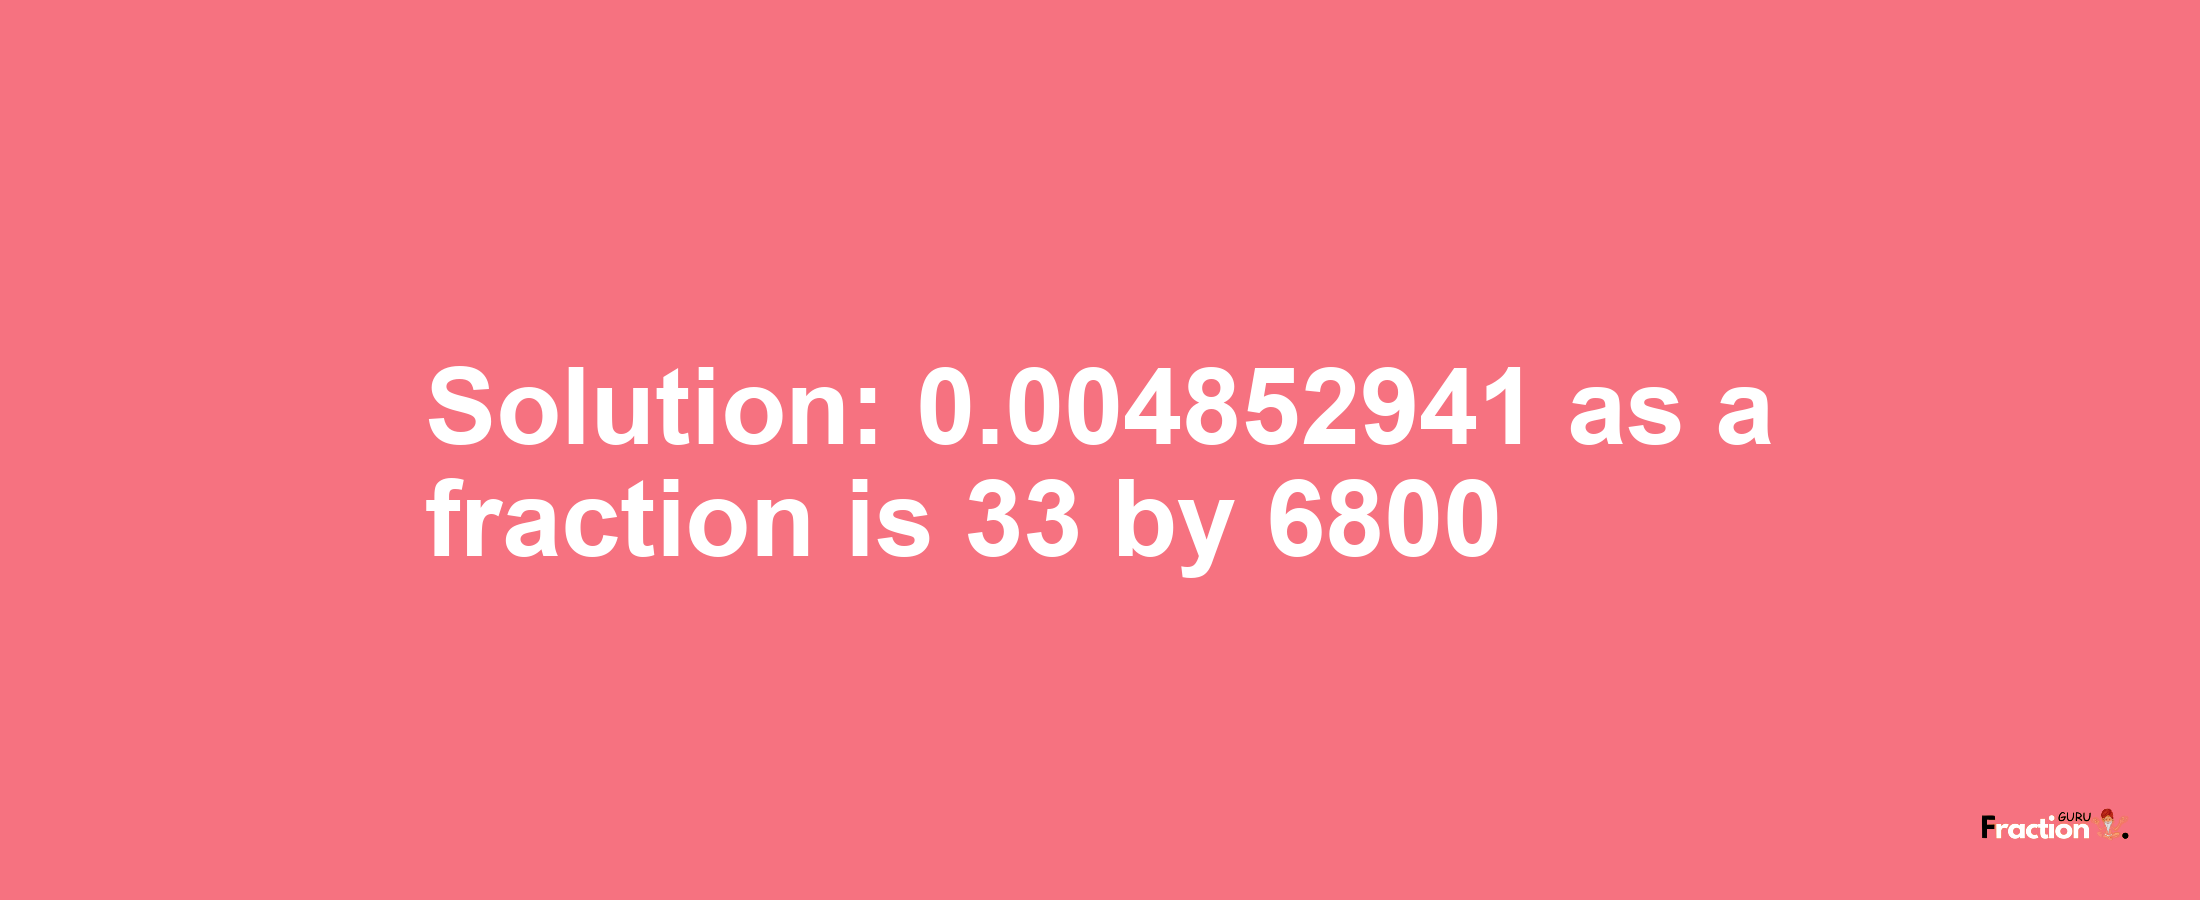 Solution:0.004852941 as a fraction is 33/6800